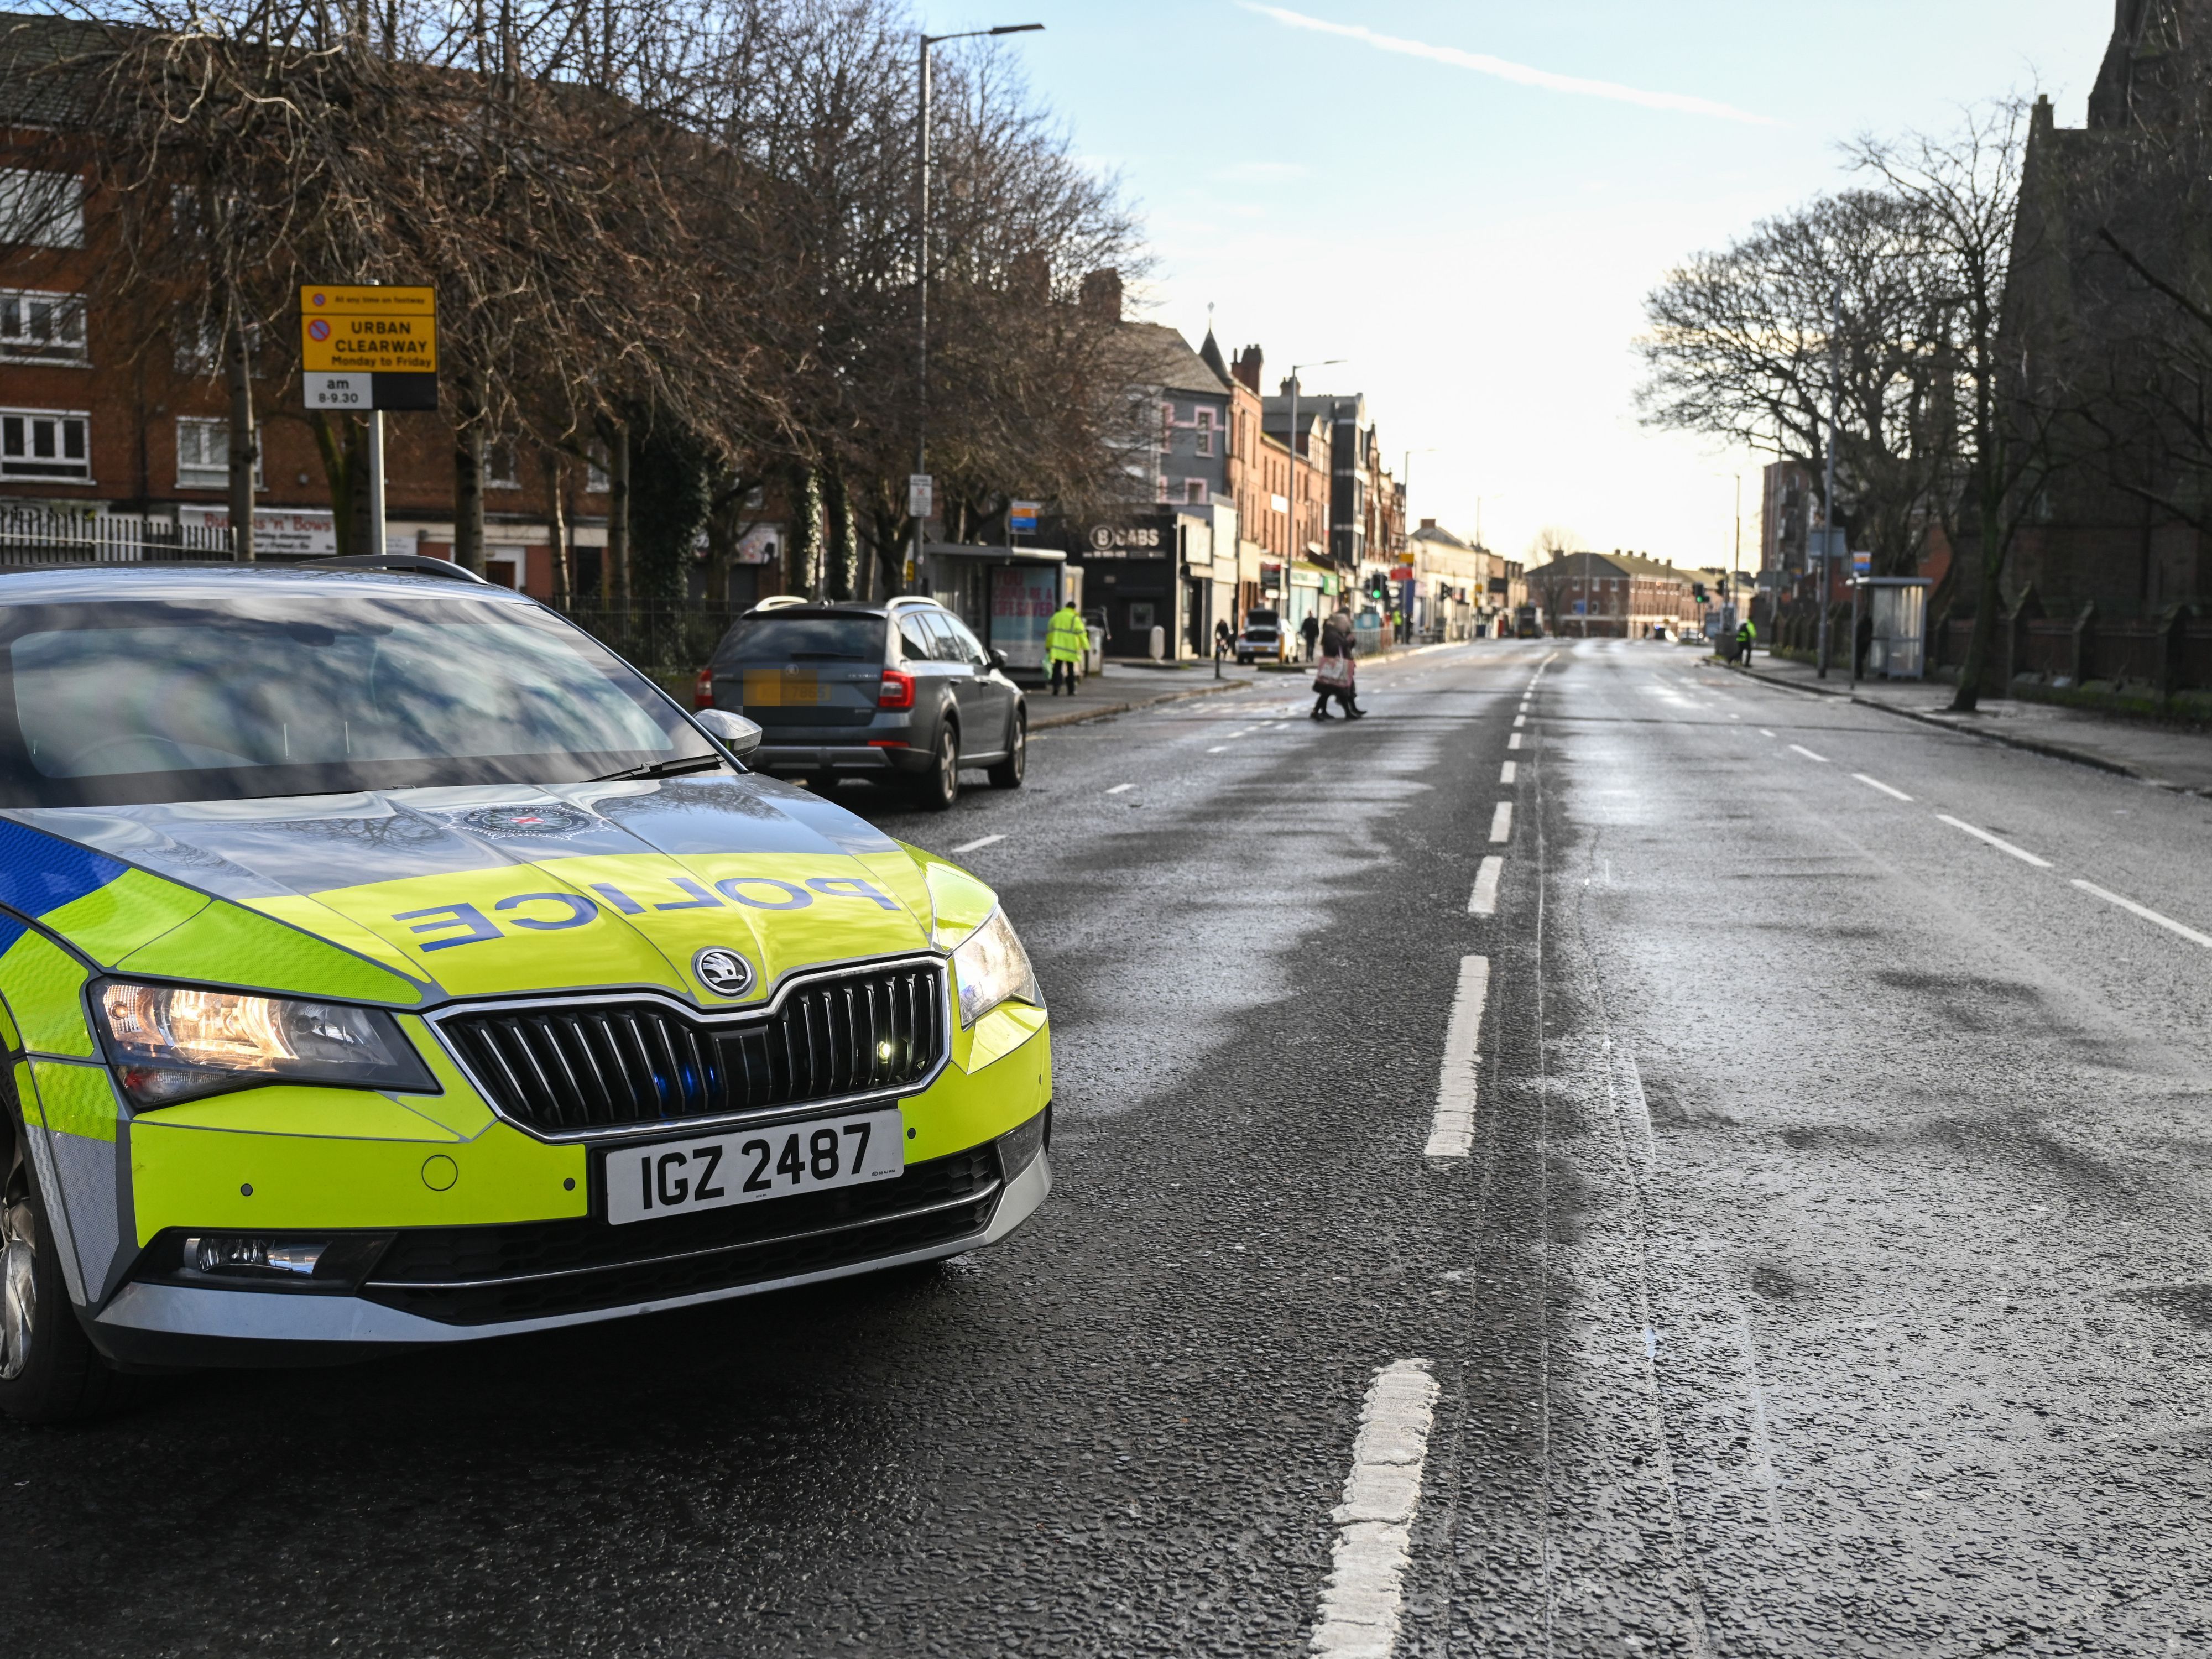 SHOOTING: The Antrim Road in North Belfast were the shooting took place  (File photo)